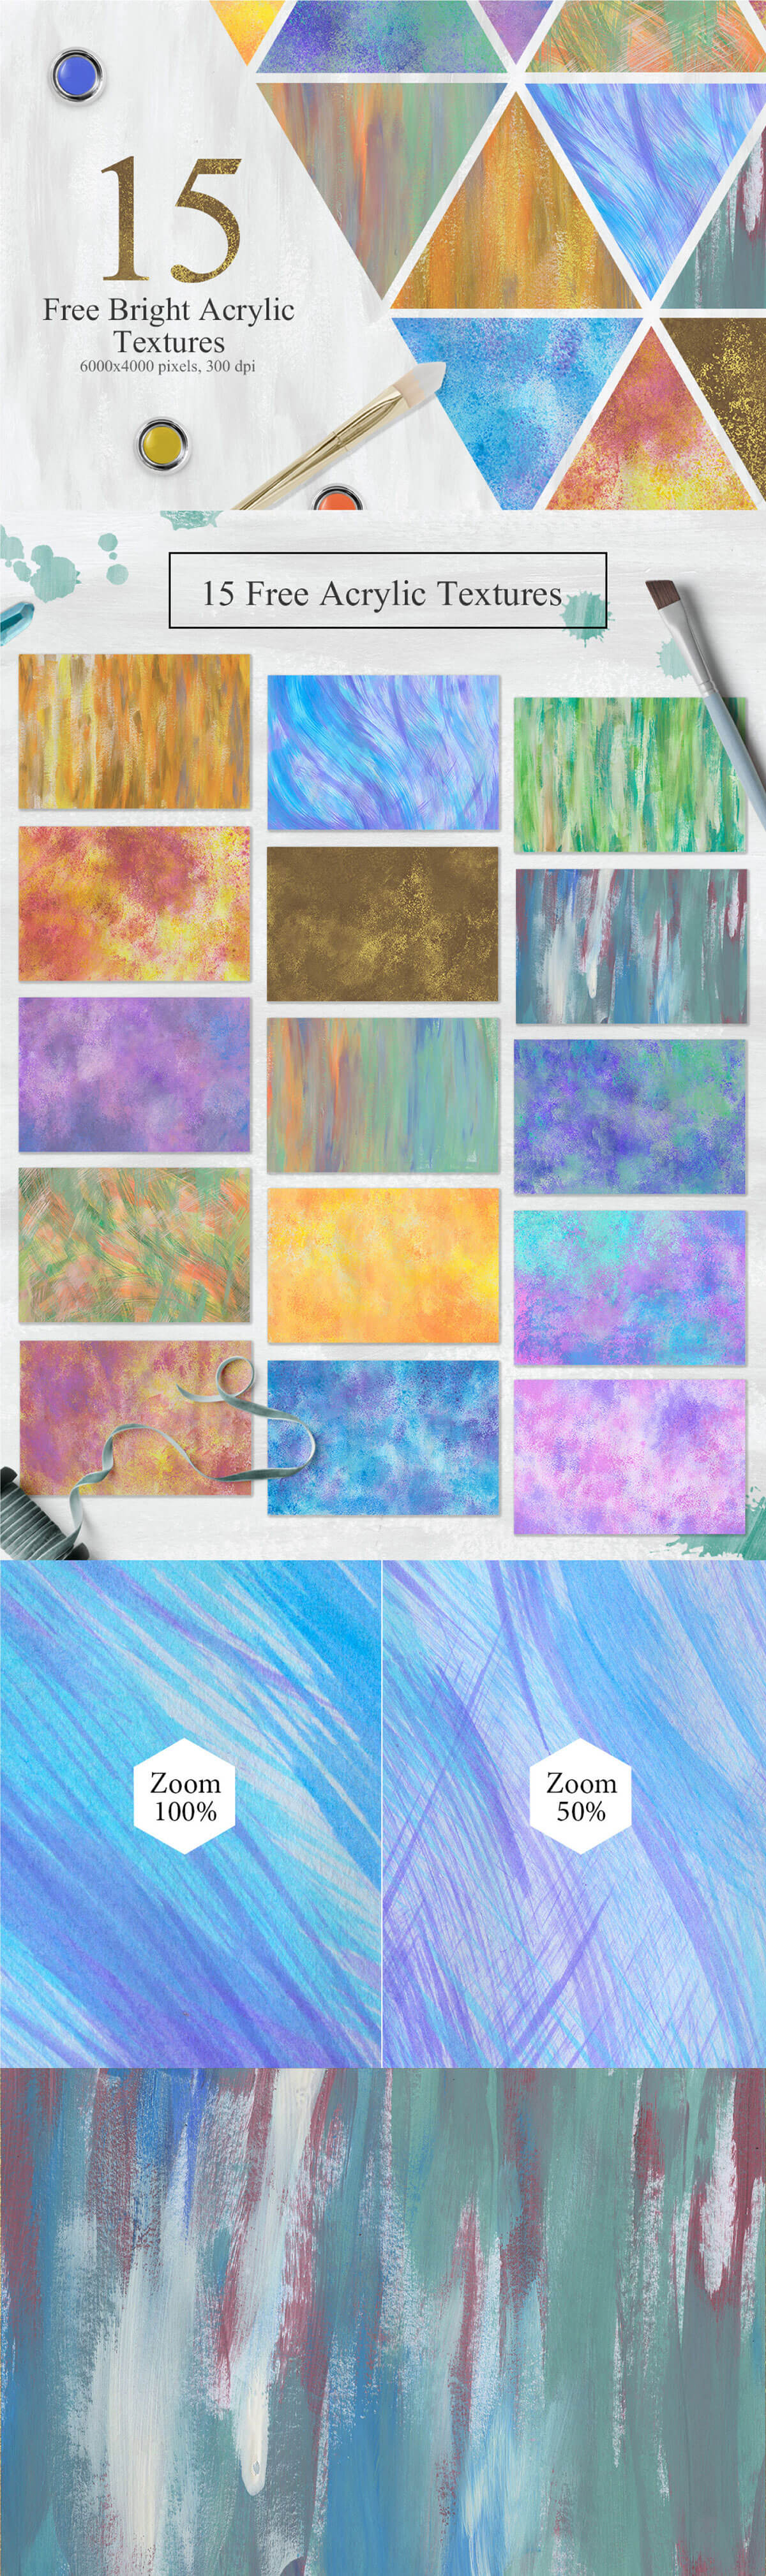 10 Free Acrylic Textures set can give trendy, hand-illustrated acrylic feel to any of your projects. These textures are high resolution, they’ll work great in print, web graphic, album art, concert poster/flyer, branding/identity imagery, packaging, patterns, cases, art, apps, invitations, decoration, and so more. Big thanks to Nassy Art for sharing this awesome textures to our community. <div class="sw-tweet-clear"></div><a class="swp_CTT style1" href="https://twitter.com/share?text=%26quot%3B10&via=hicreativetacos&url=https://creativetacos.com/modern-abstract-acrylic-textures/" data-link="https://twitter.com/share?text=%26quot%3B10&via=hicreativetacos&url=https://creativetacos.com/modern-abstract-acrylic-textures/" rel="nofollow noreferrer noopener" target="_blank"><span class="sw-click-to-tweet"><span class="sw-ctt-text">"10</span><span class="sw-ctt-btn">Click To Tweet<i class="sw swp_twitter_icon"></i></span></span></a> Included With Acrylic Textures Format: JPG Resolution: 6000 × 4000 px at 300 DPI File Size: 46 MB License: Free For Personal & Commercial Use Author: Nassy Art [Download not found] <a href=""https://crmrkt.com/6K3ey6"" class="su-button su-button-style-"3d"" style="color:#FFFFFF;background-color:"#f14c2f";border-color:"#f14c2f";border-radius:2px;-moz-border-radius:2px;-webkit-border-radius:2px" target="_"blank""><span style="color:#FFFFFF;padding:0px 10px;font-size:9px;line-height:18px;border-color:"#f14c2f";border-radius:2px;-moz-border-radius:2px;-webkit-border-radius:2px;text-shadow:none;-moz-text-shadow:none;-webkit-text-shadow:none"> Purchase Full Version On Creative Market</span></a>